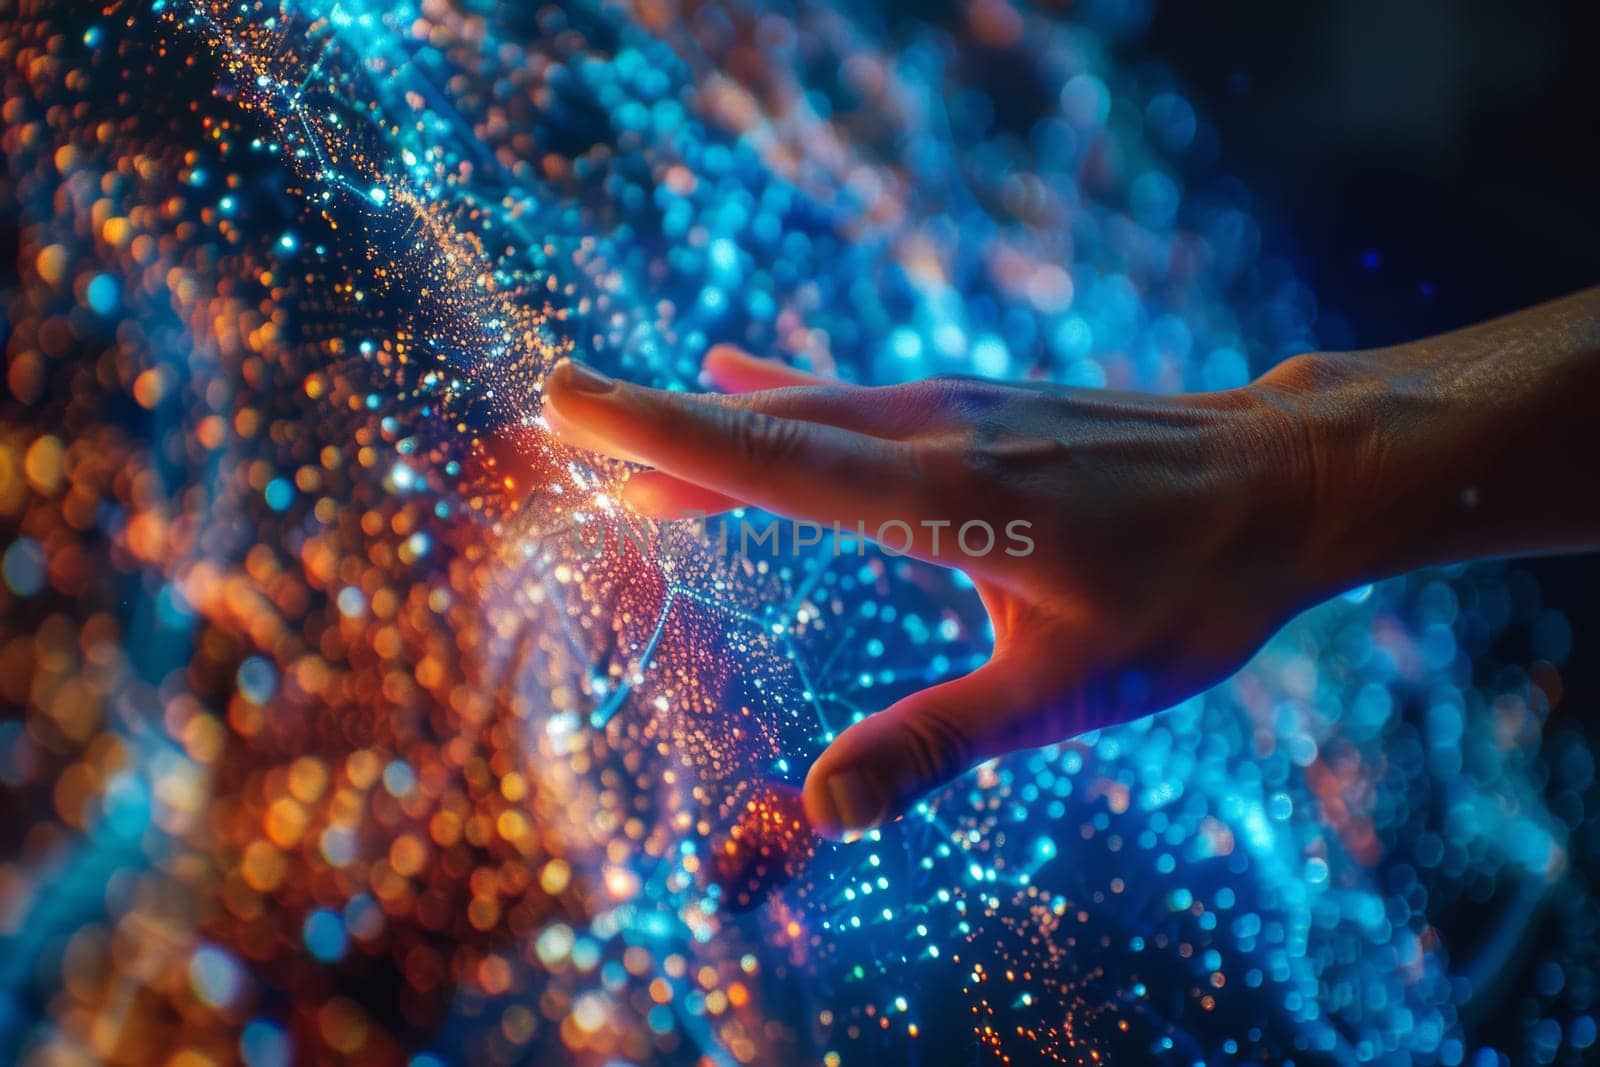 A hand is touching a glowing blue and orange background. Concept of wonder and curiosity, as if the hand is reaching out to explore the unknown